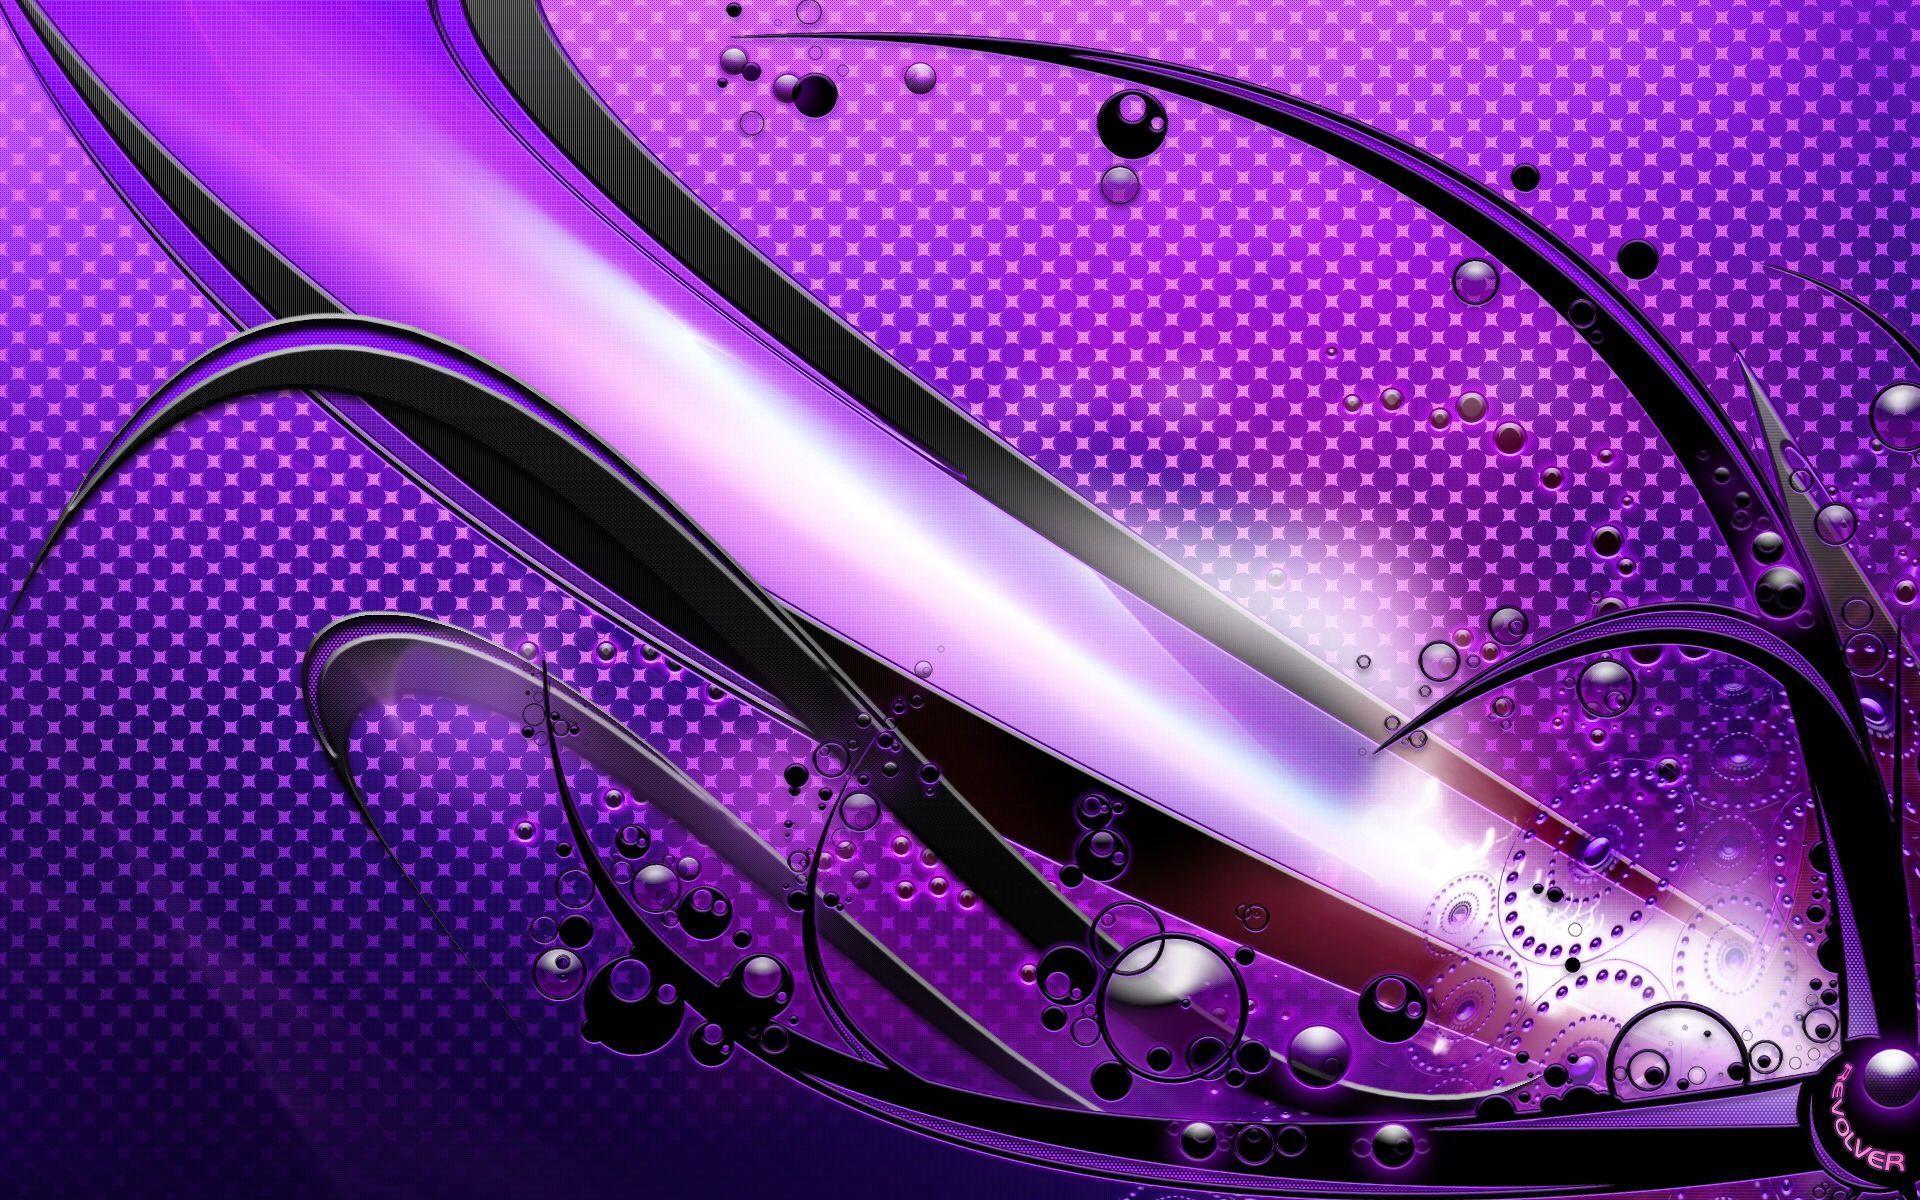 Cool Purple Backgrounds - Wallpaper Cave